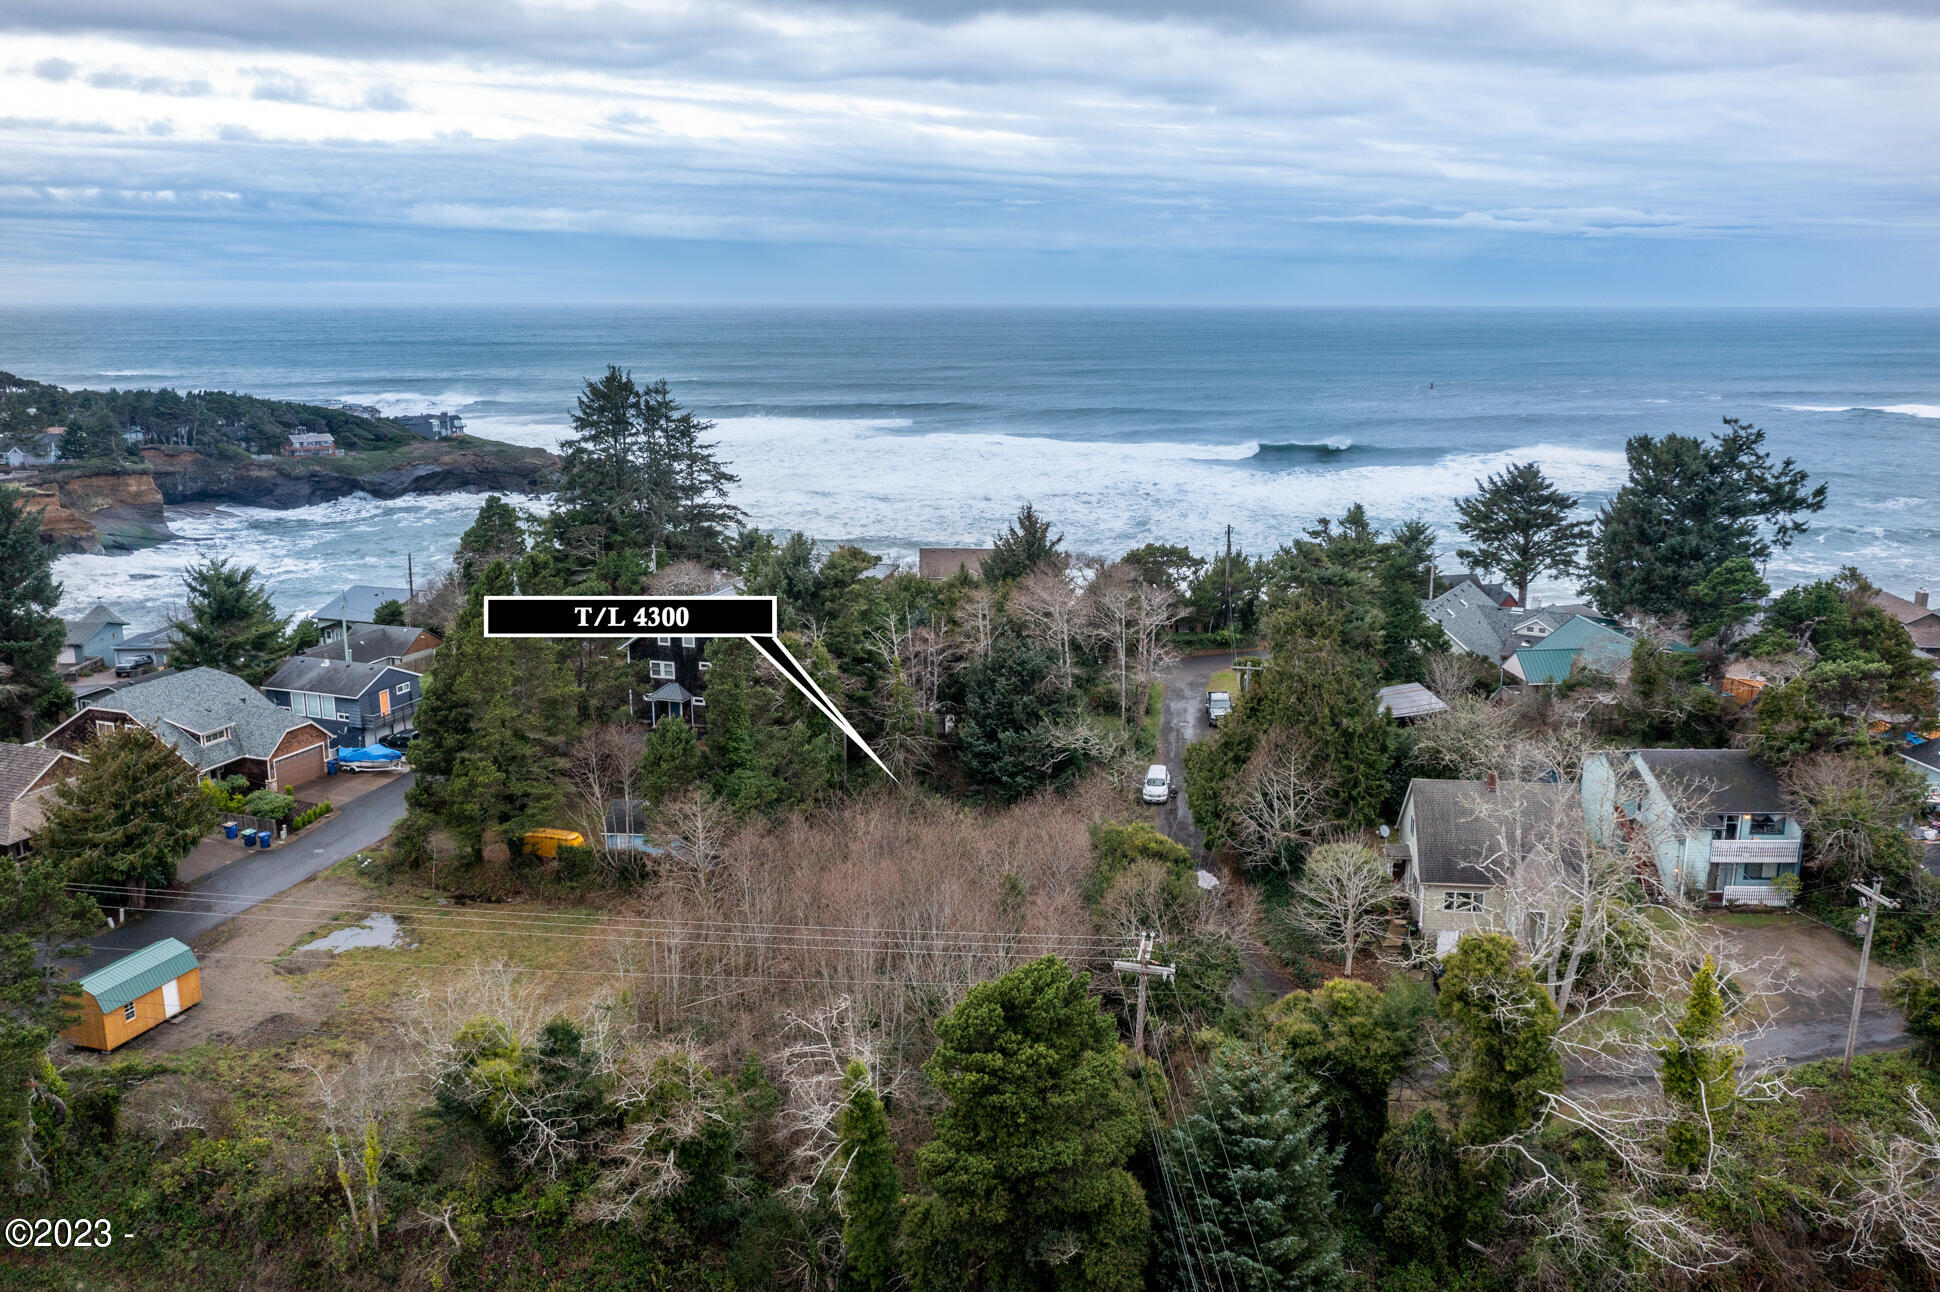 14 SW Brisco St Depoe Bay, Gleneden Beach, Lincoln City, Newport, Otis, Rose Lodge, Seal Rock, Waldport, Yachats, To Home Listings - Amy Plechaty, Emerald Coast Realty Real Estate, homes for sale, property for sale